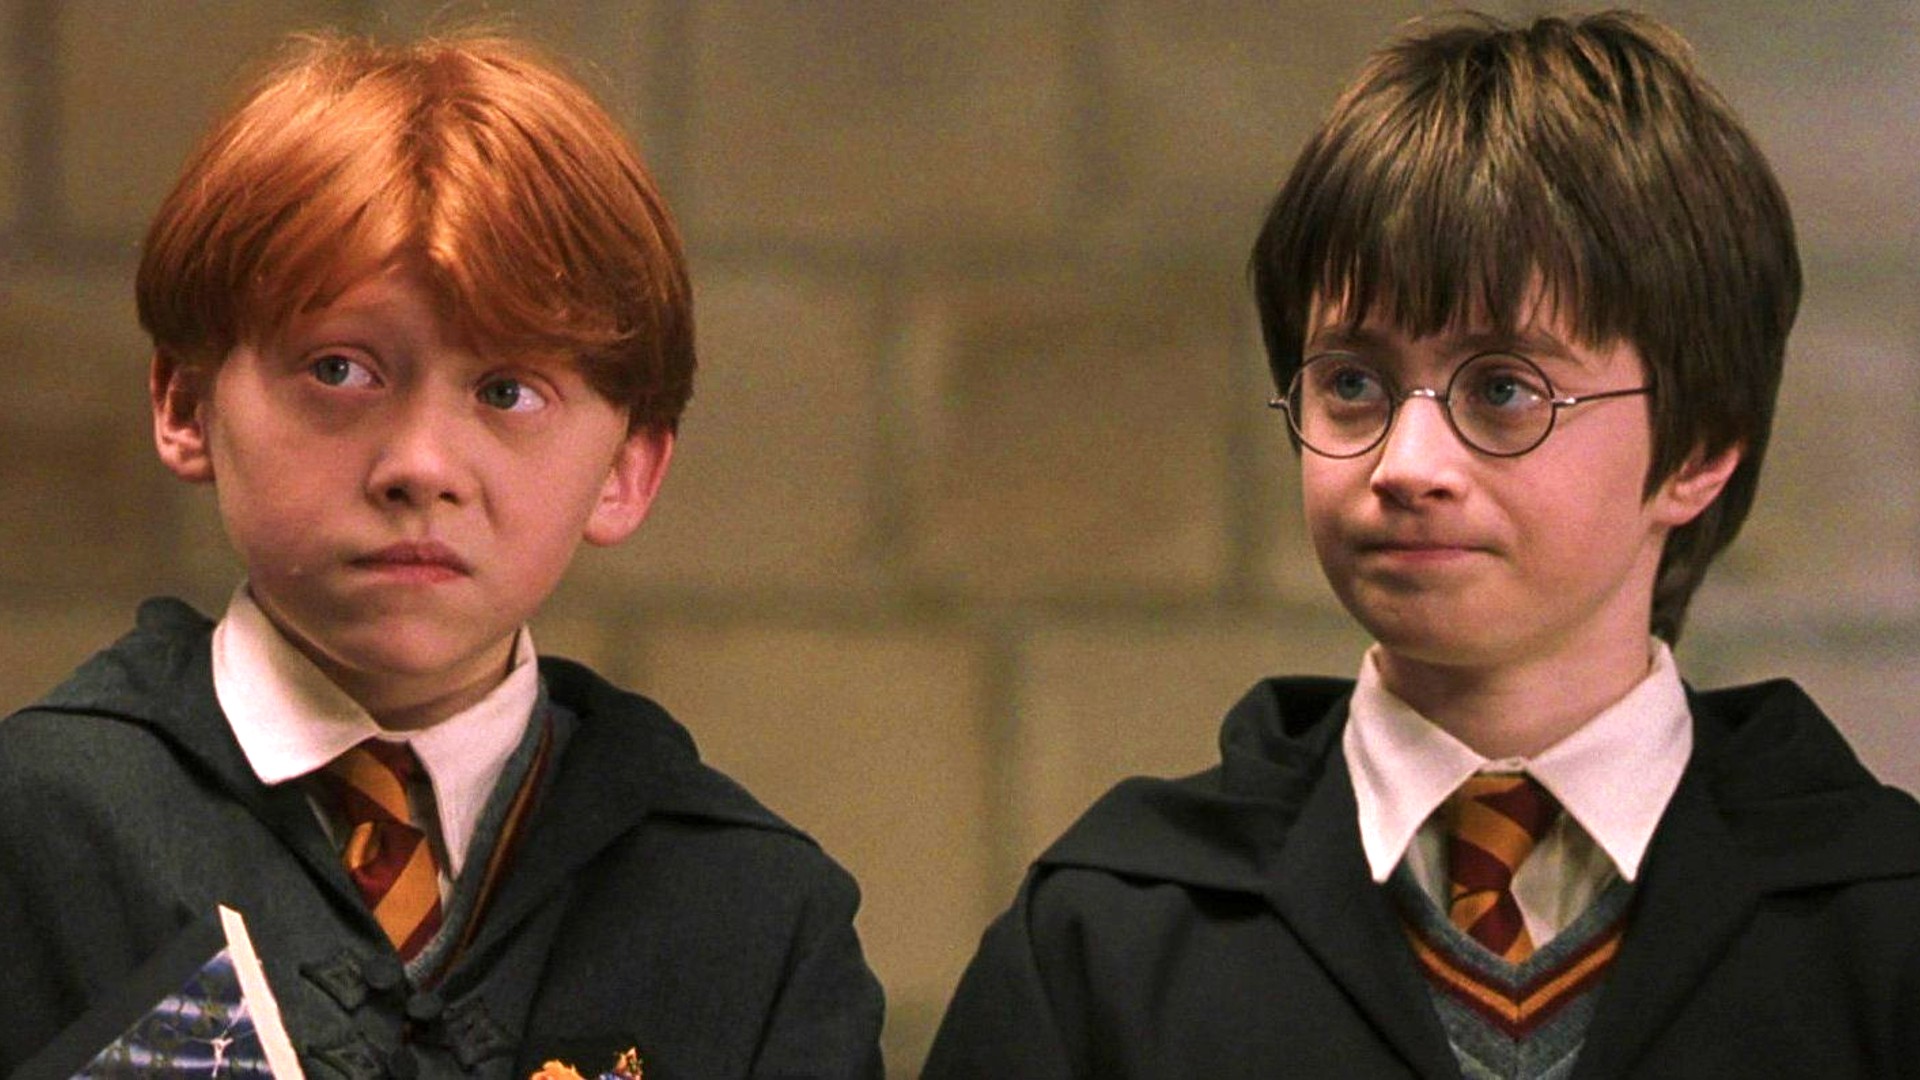 Sorting Hat Quiz: Which Hogwarts House Do You Belong To?